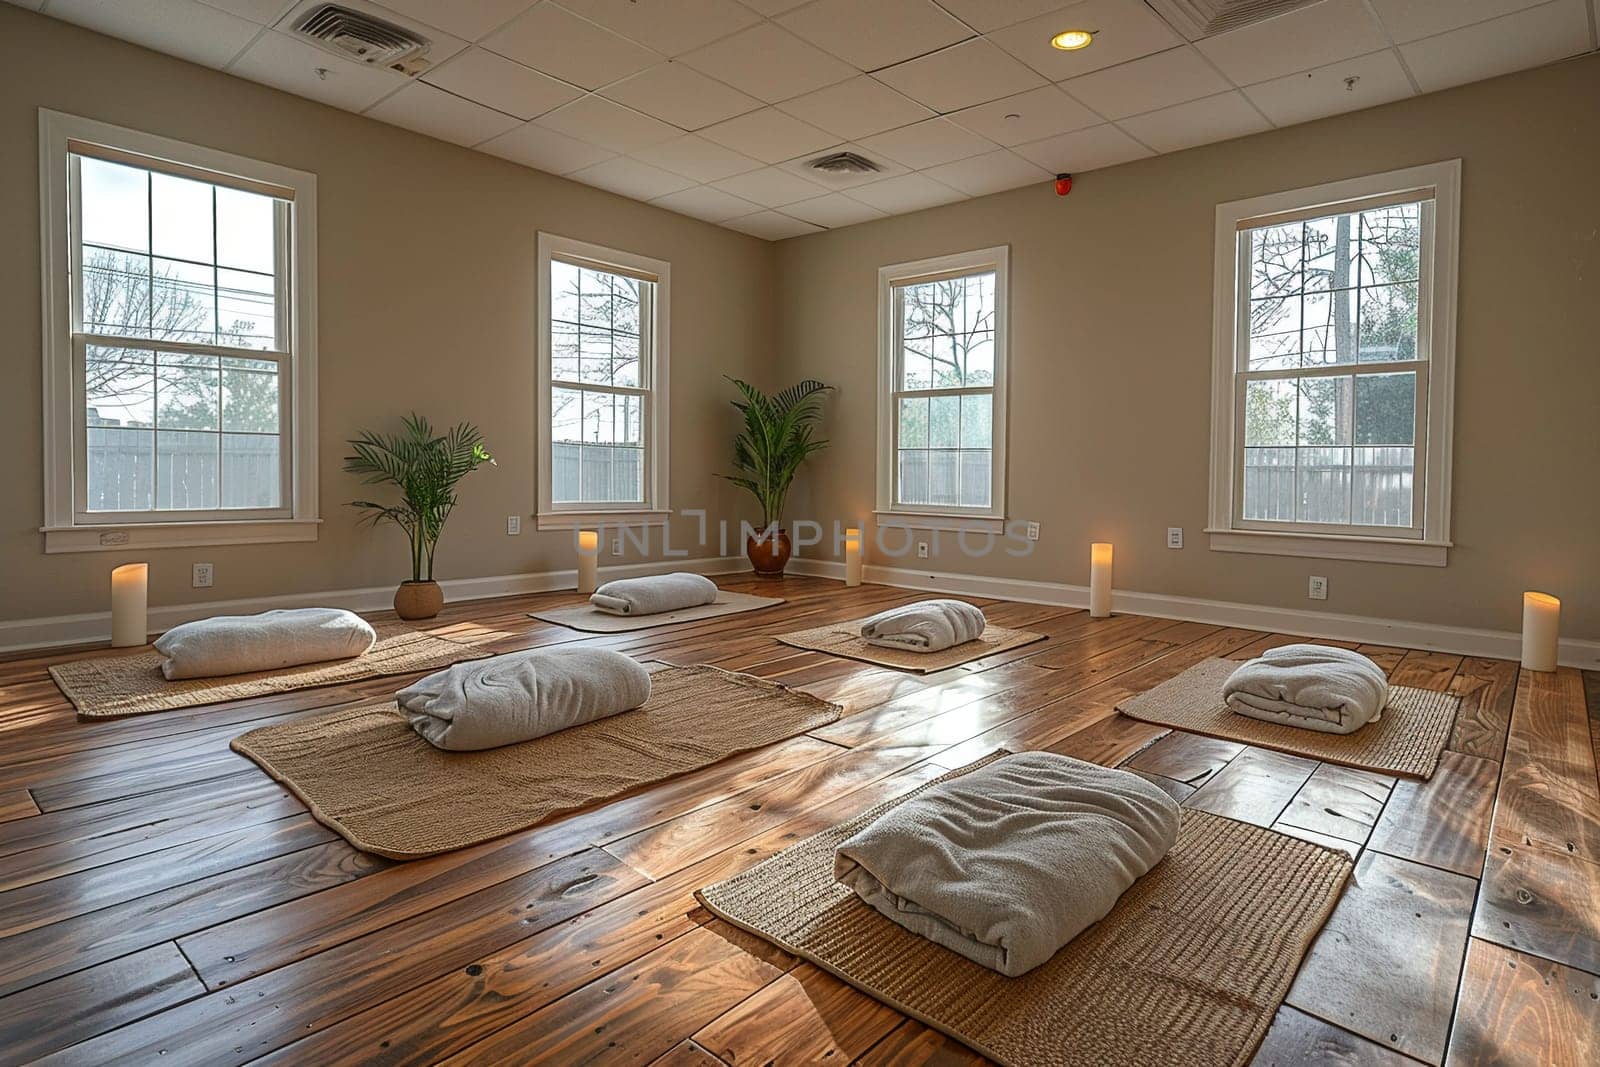 Peaceful yoga studio with natural wood floors and calming colors by Benzoix